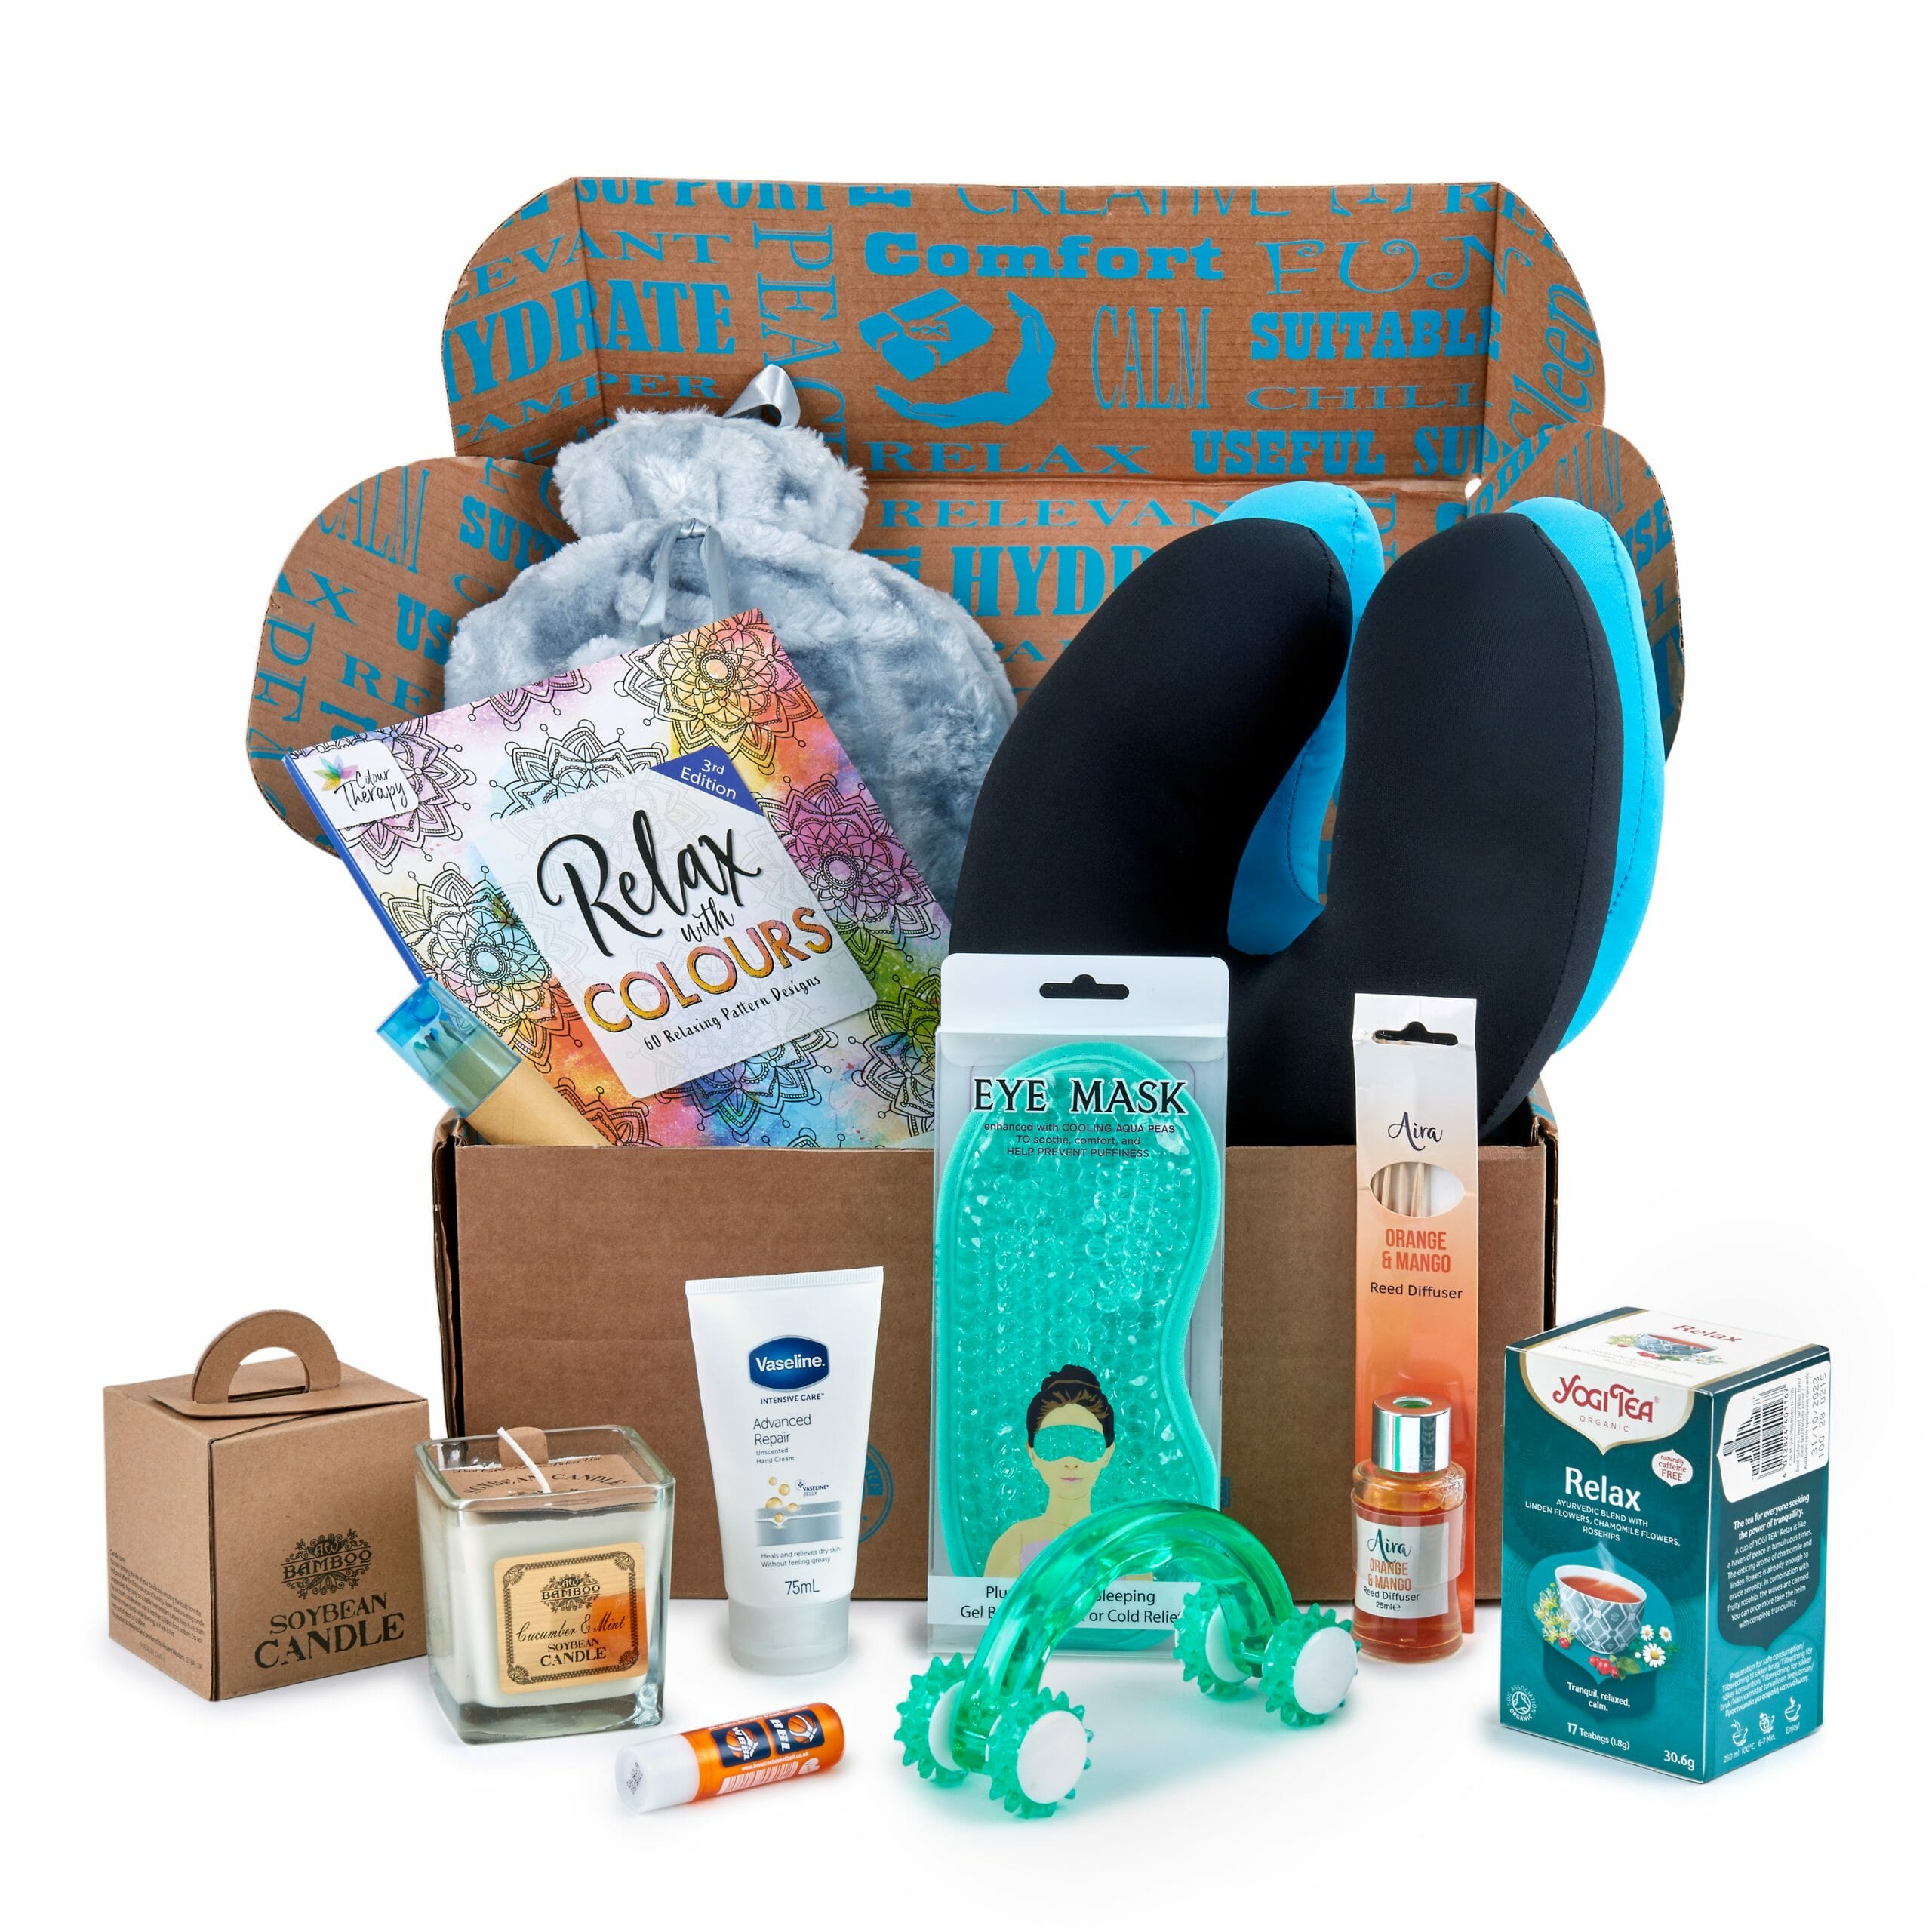 Pamper gift for cancer patients